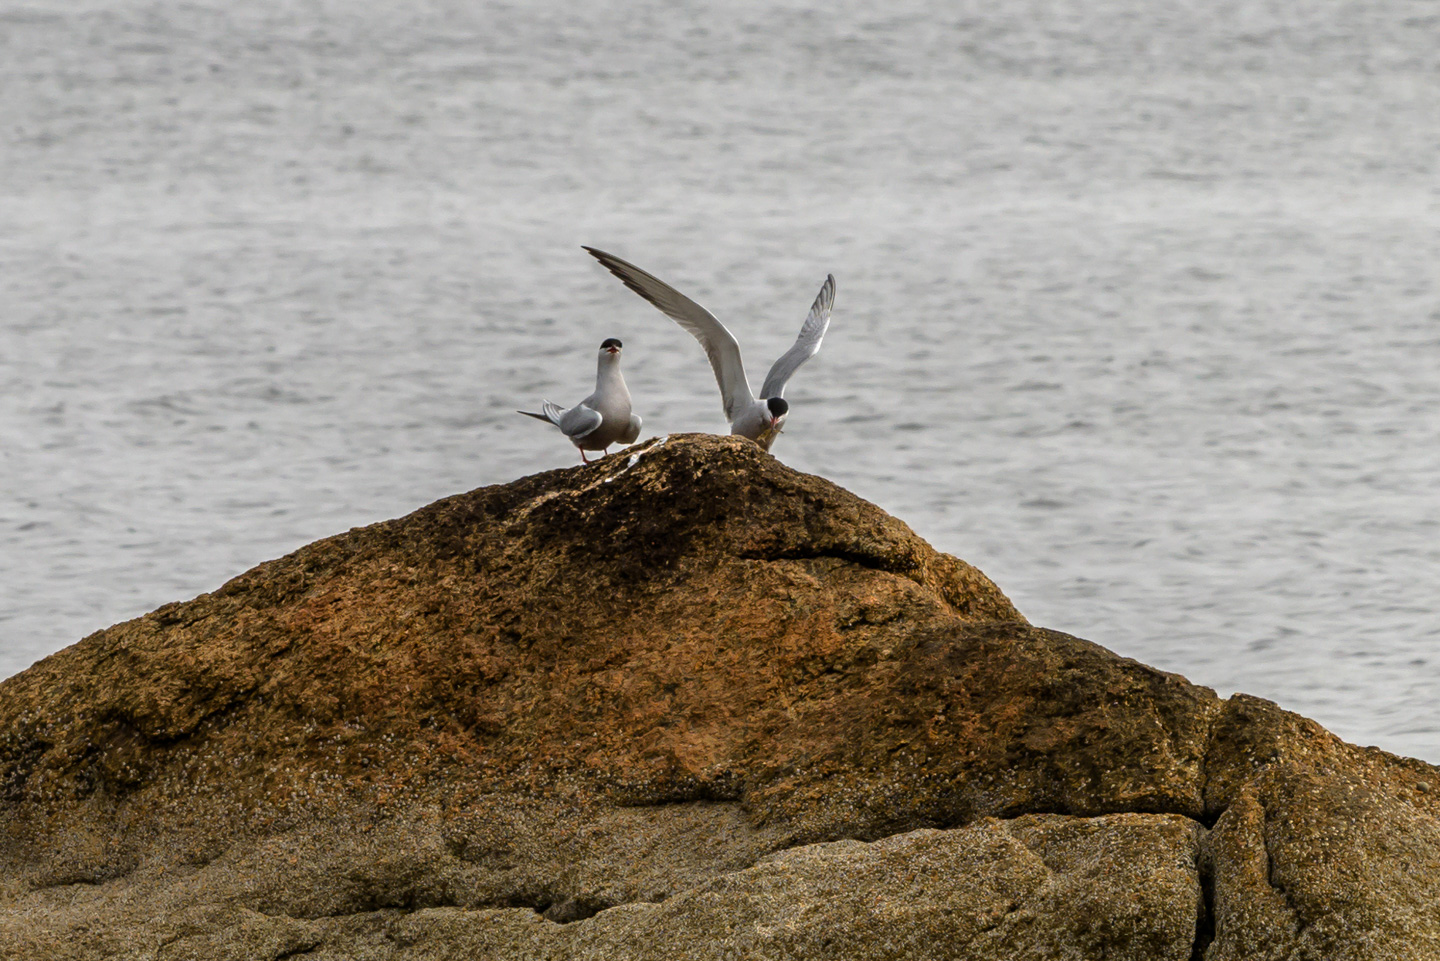 Common Terns on a rock, one of which has its wings unfurled.